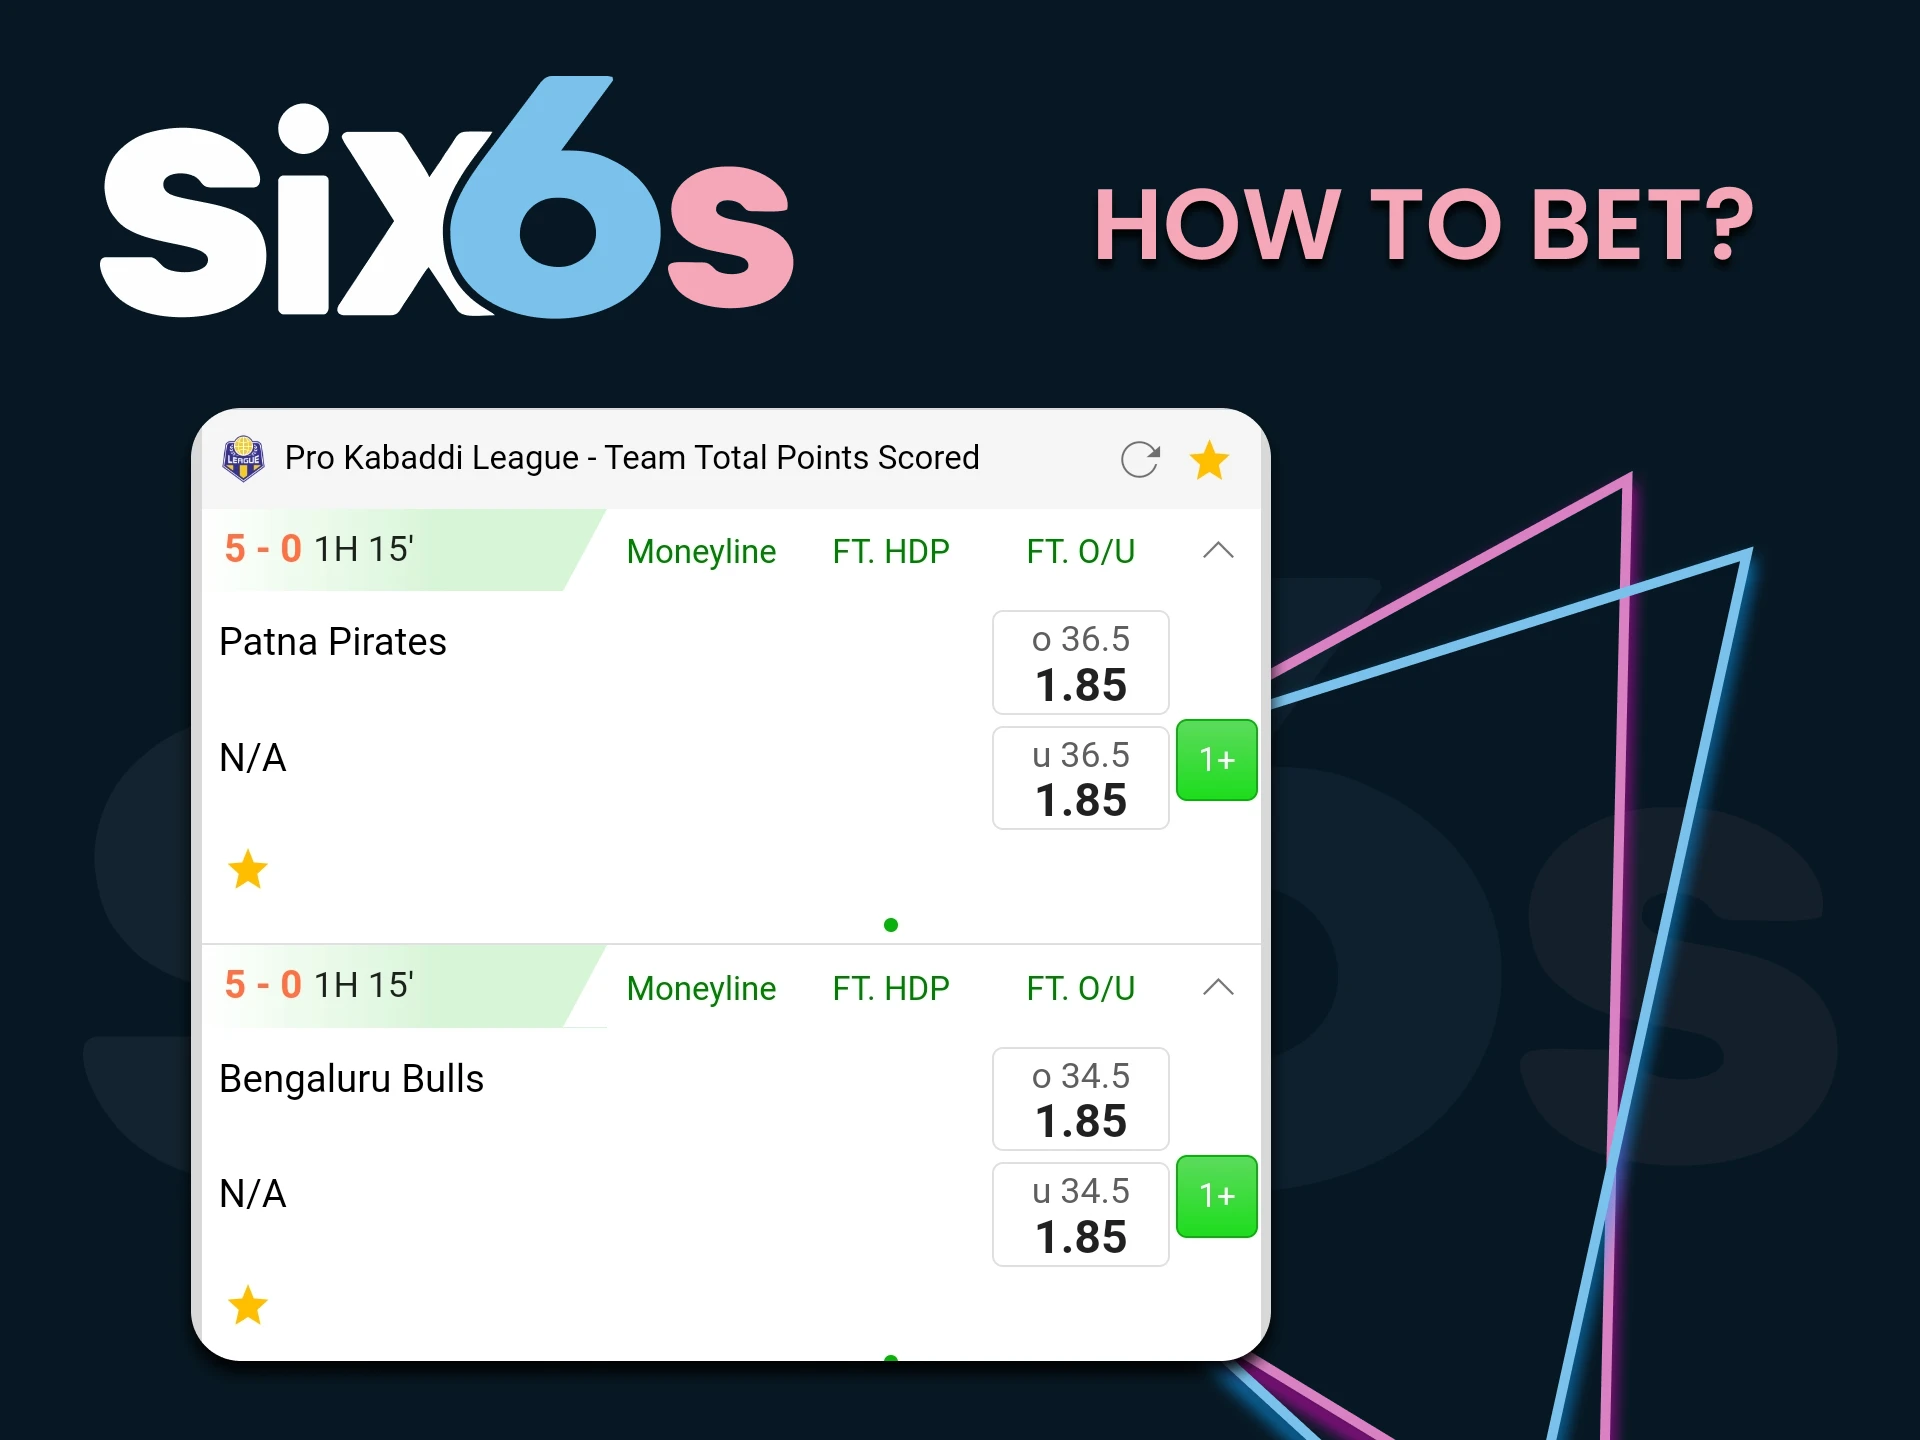 Go to the sports section for kabaddi betting from Six6s.